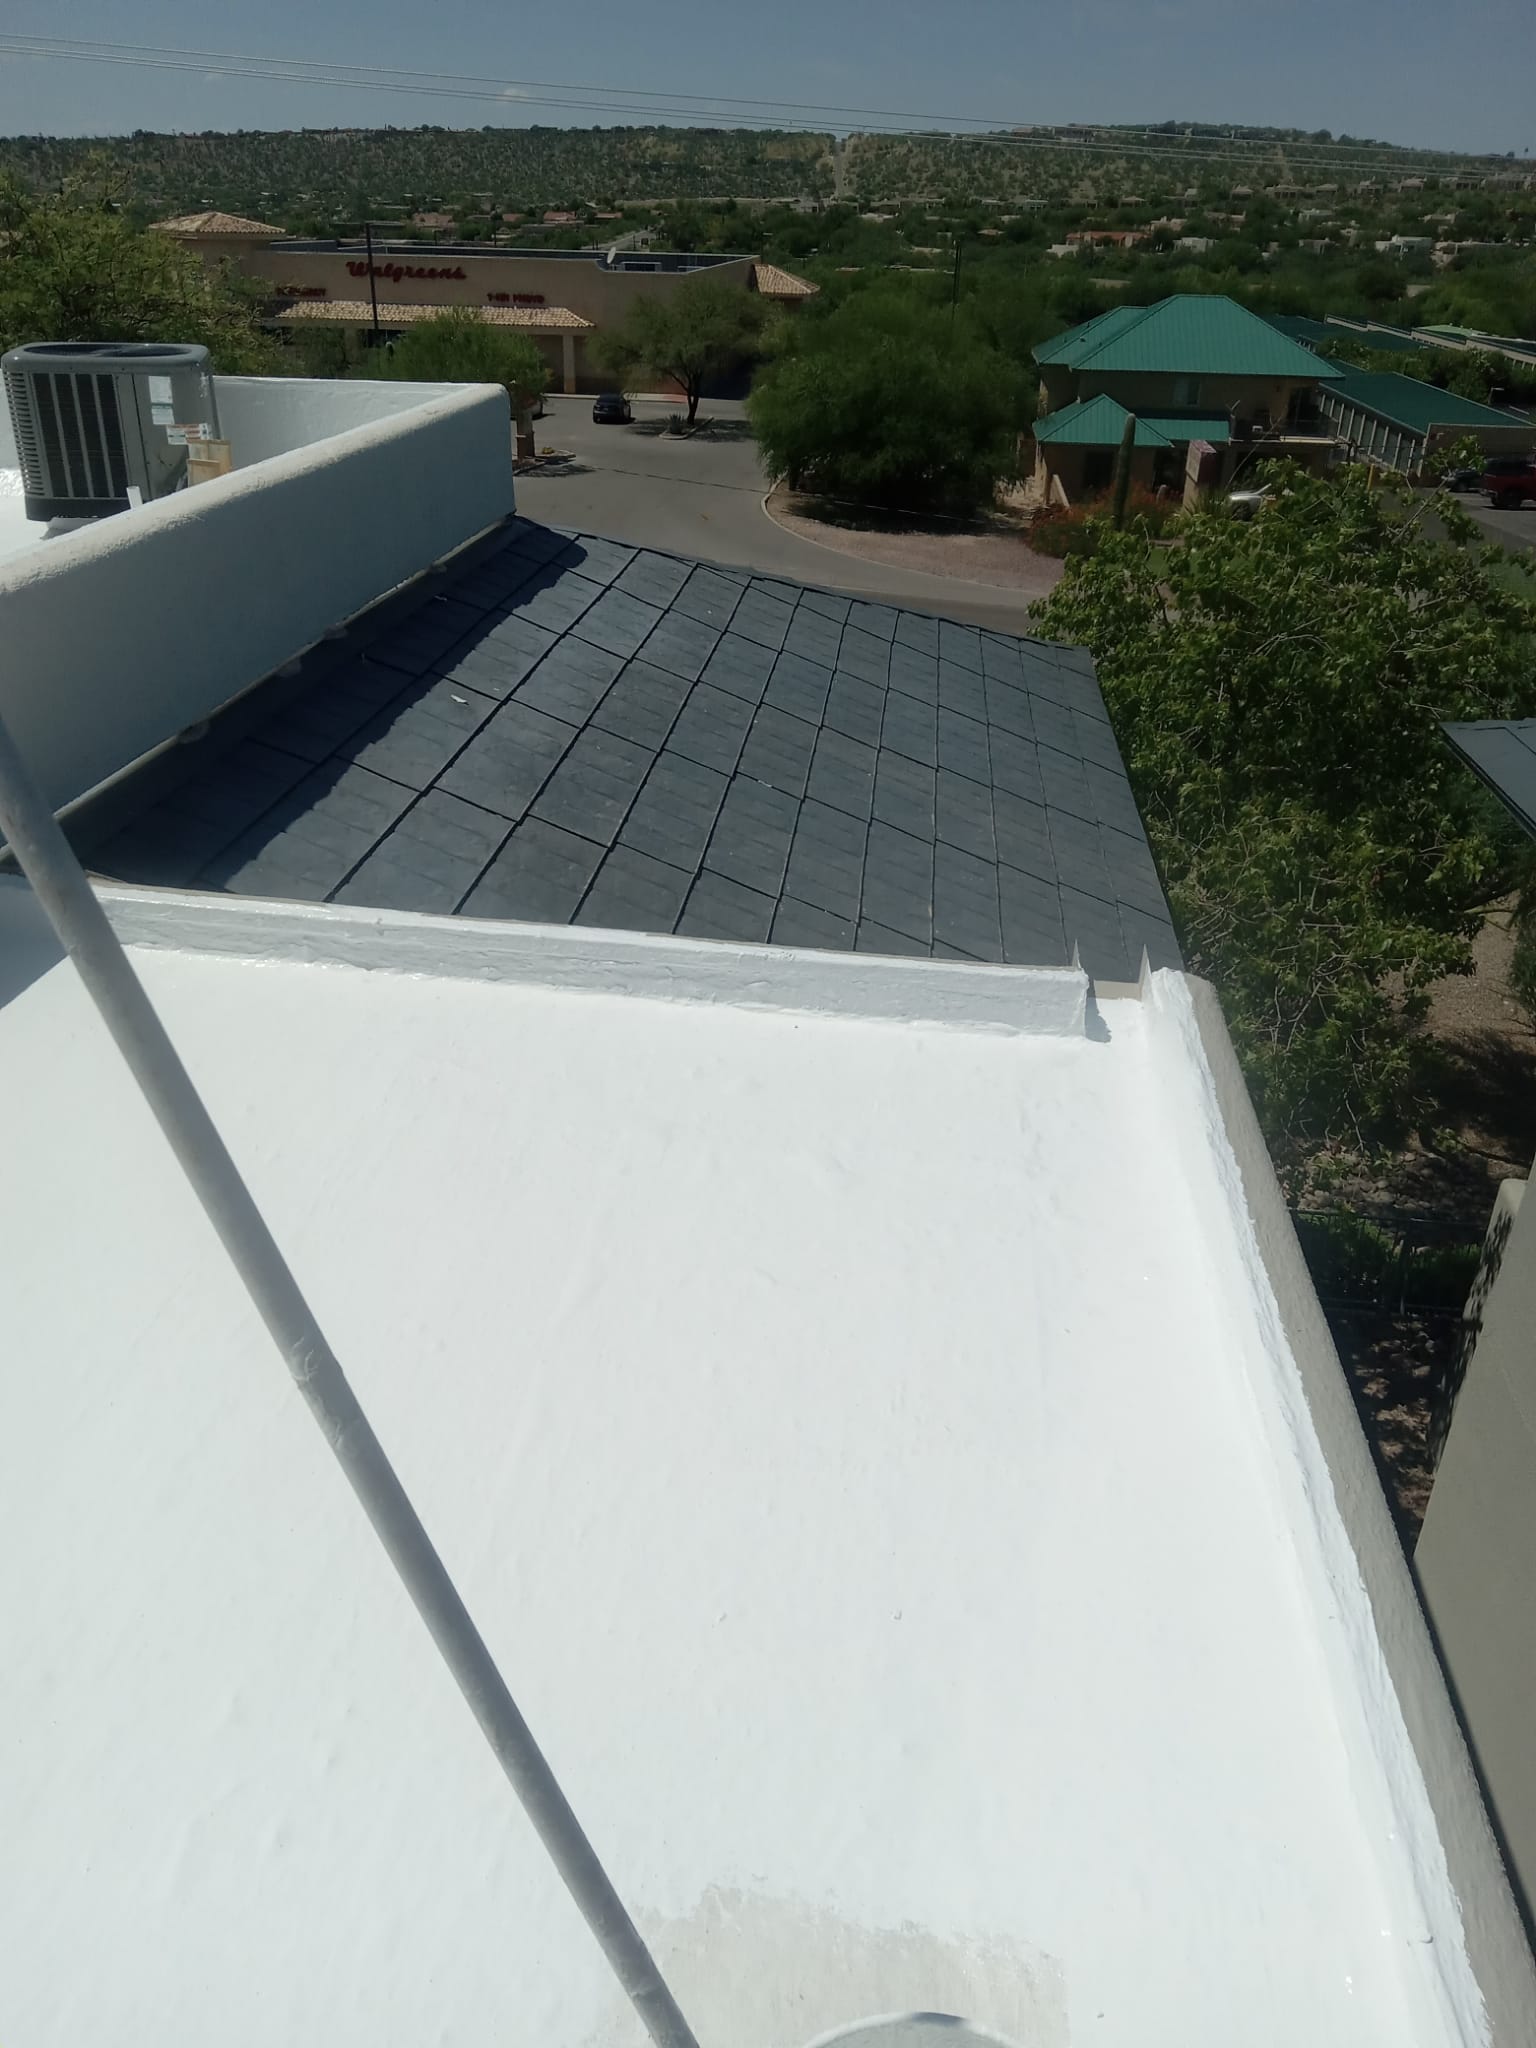 Professionally coated foam roof gleaming under the Carefree sun, showcasing the quality of installation.